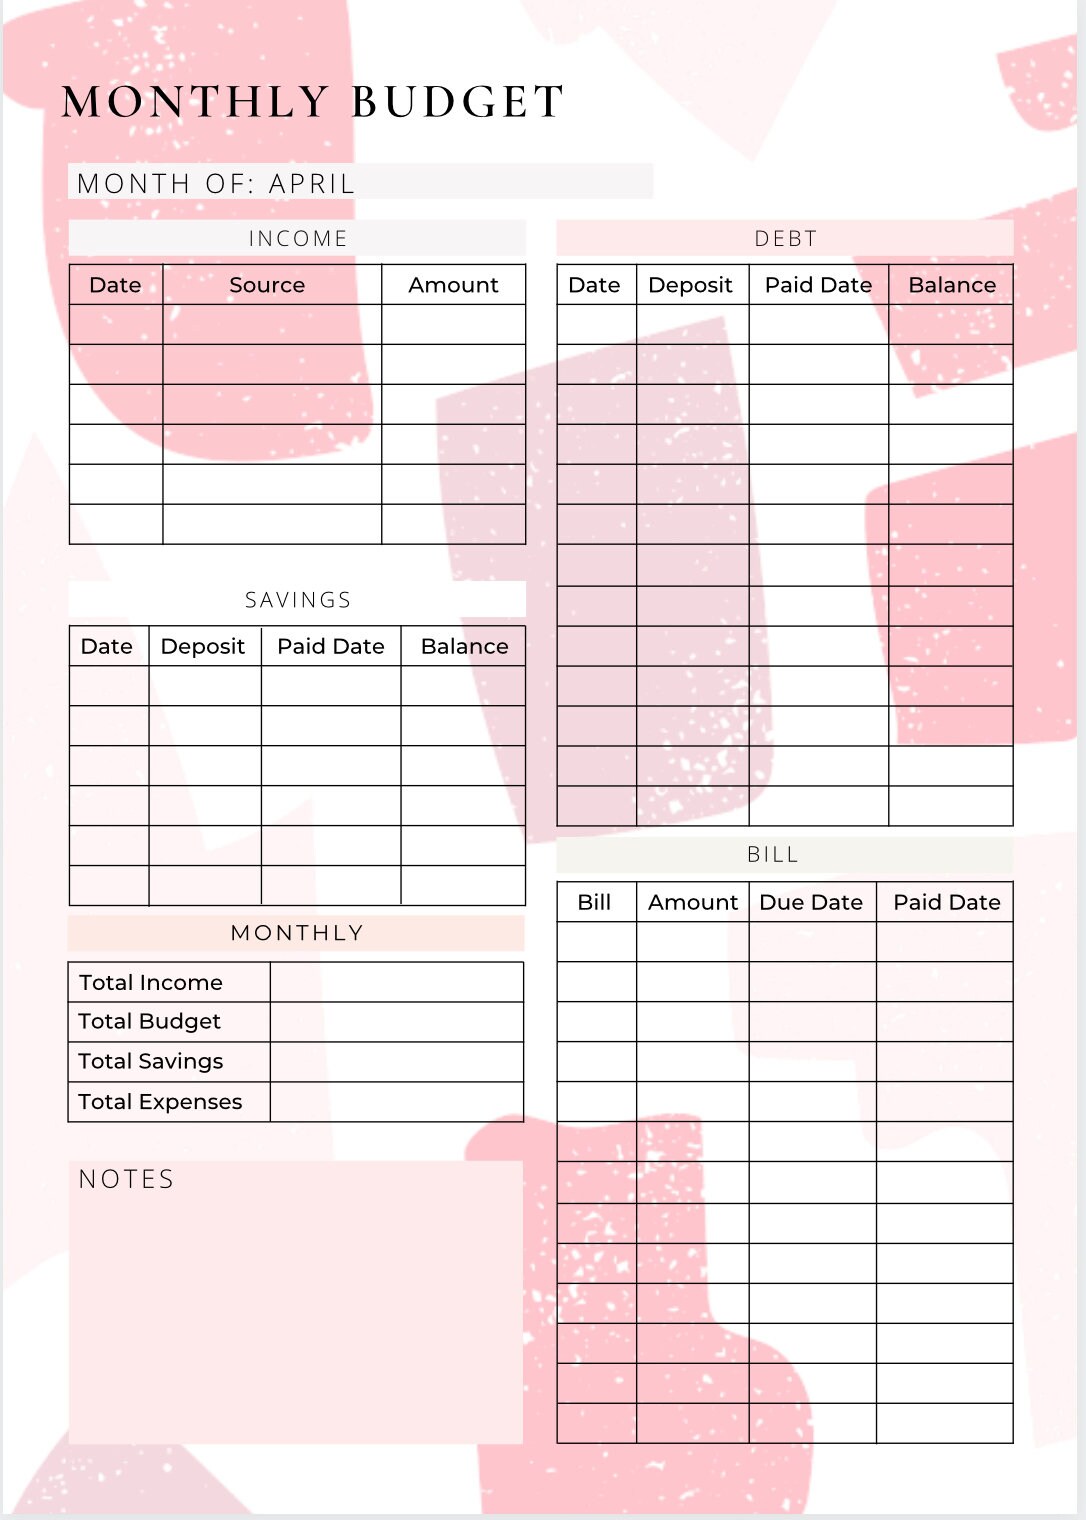 12 Month Pink Monthly Budget Planner Financial Journalmonthly Budget Sheet  Paycheck Budgetbiweekly Budgetfinance Binderbudget Planning 